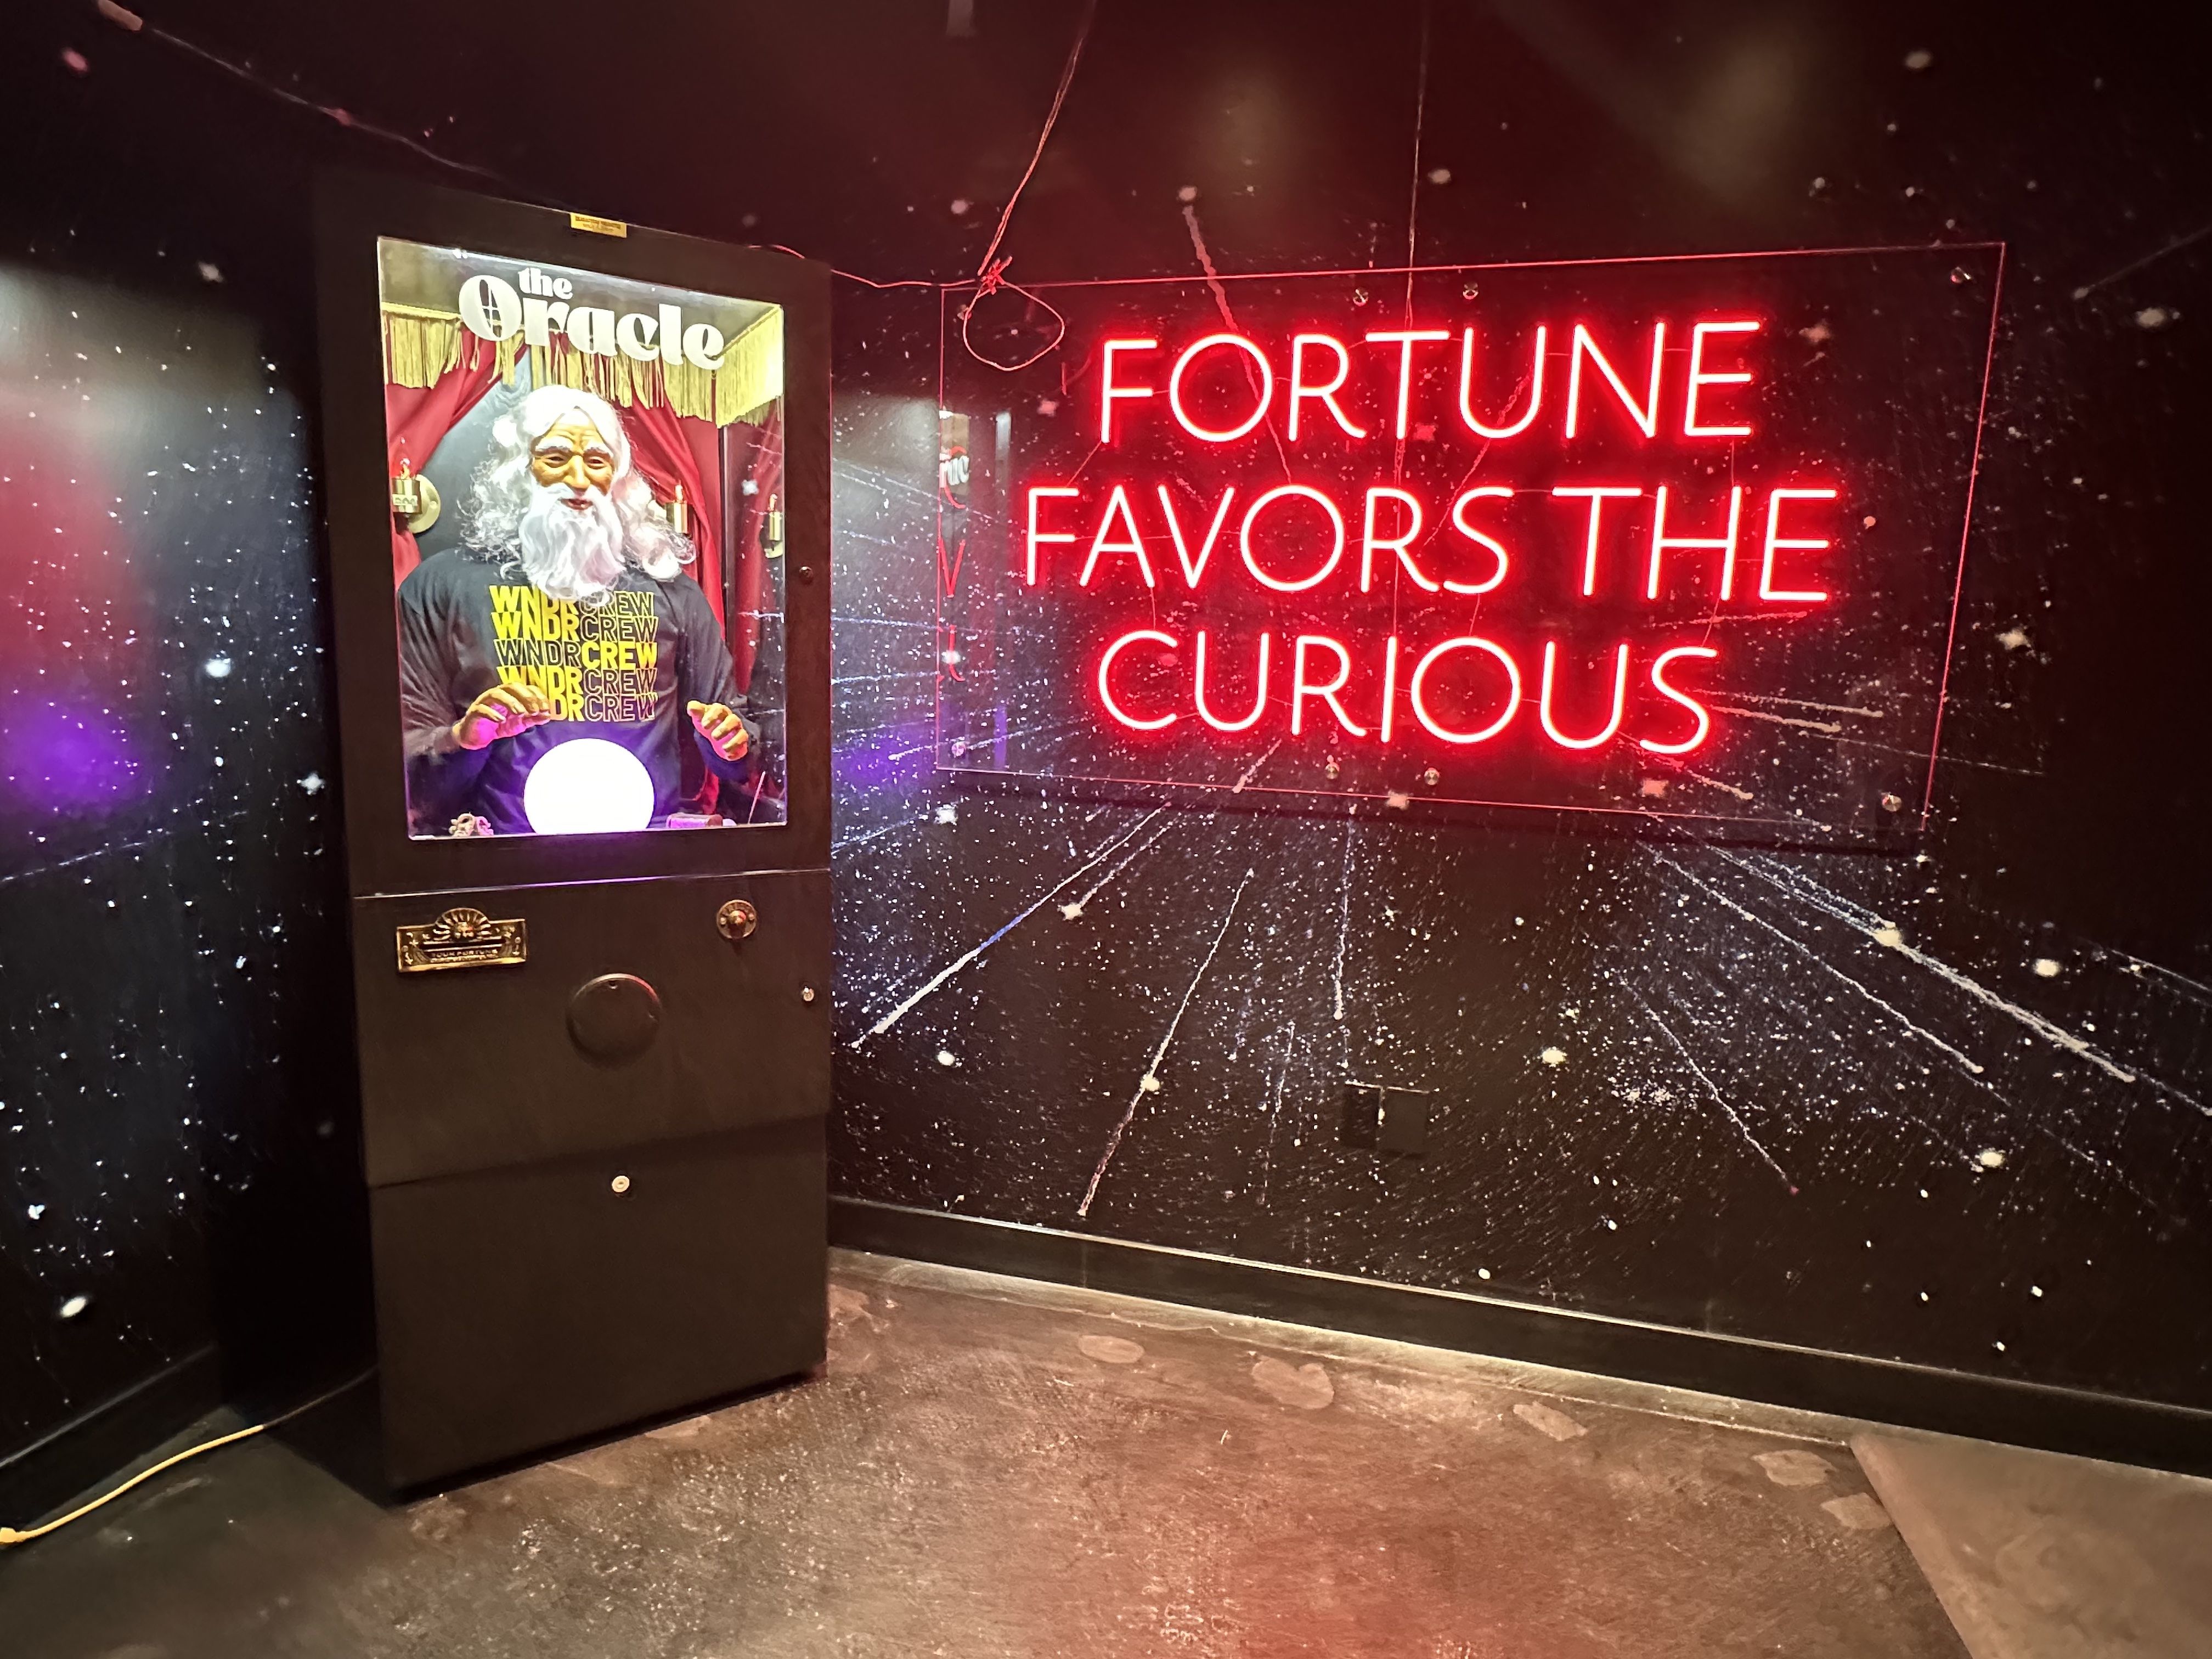 The WNDR Museum includes an installation of a white-haired man looking into a crystal ball, next to a sign that says "fortune favors the curious."